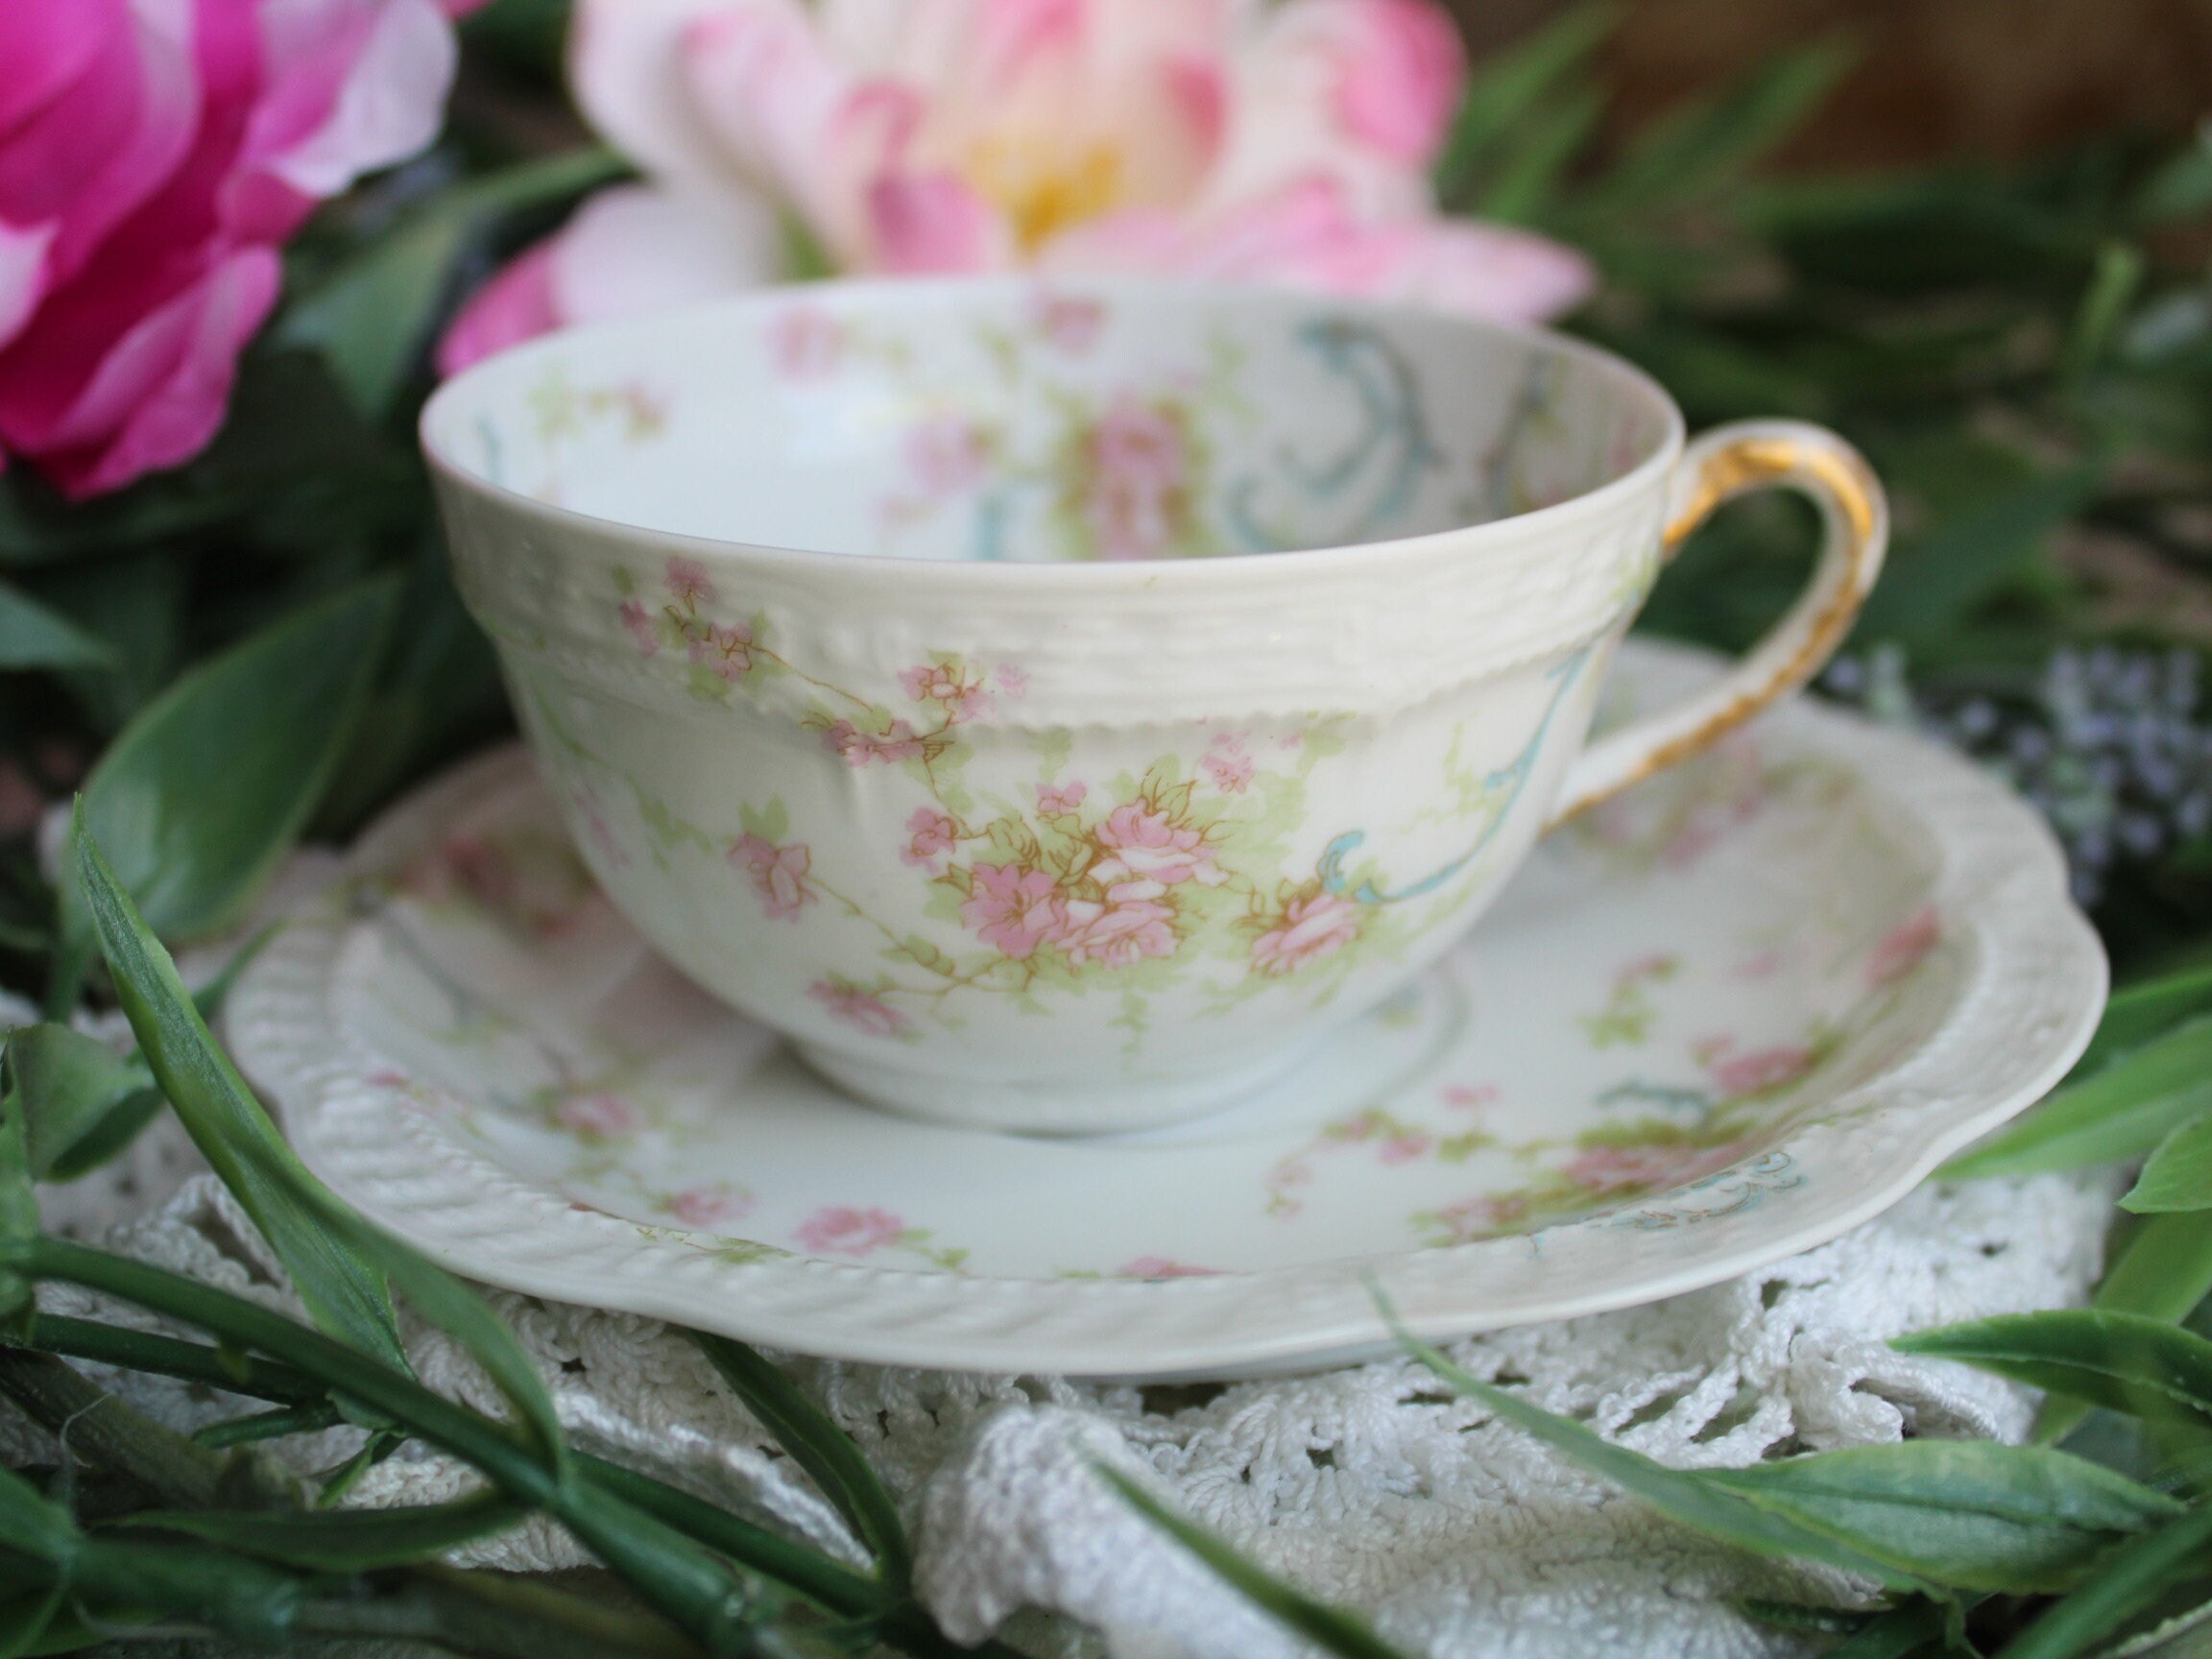 Antique The Princess Haviland Limoges Flat Teacup/Limoges Haviland France/ French Teacup/Pink Floral China/Tea Party/Gift For Her